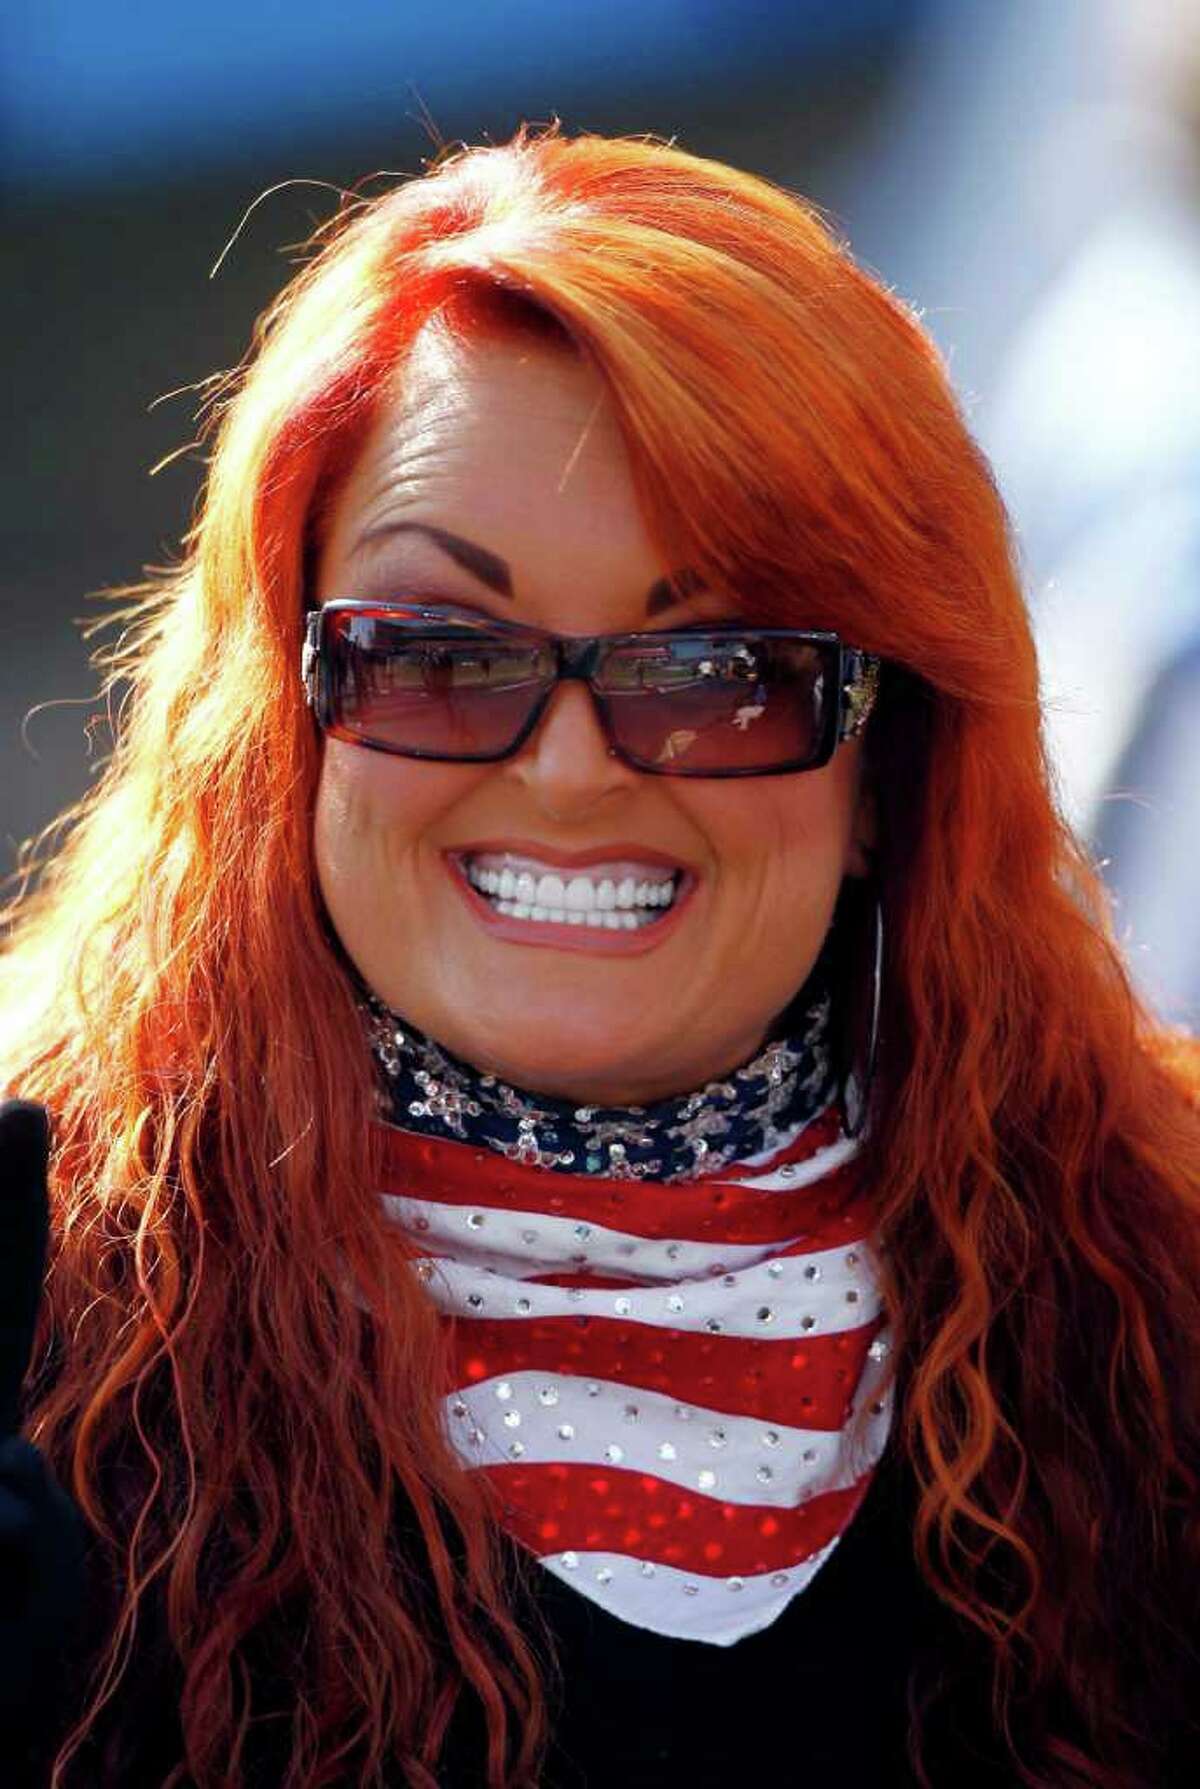 FILE- In this Sunday, Dec. 11, 2011 file photo, Wynonna Judd waits on the sidelines before singing the national anthem at an NFL football game between the New Orleans Saints and the Tennessee Titans in Nashville, Tenn. Judd is engaged to her boyfriend, the drummer for the country group Highway 101. Judd, 47, and Cactus Moser, 54, got engaged Dec. 24. (AP Photo/Wade Payne, File)